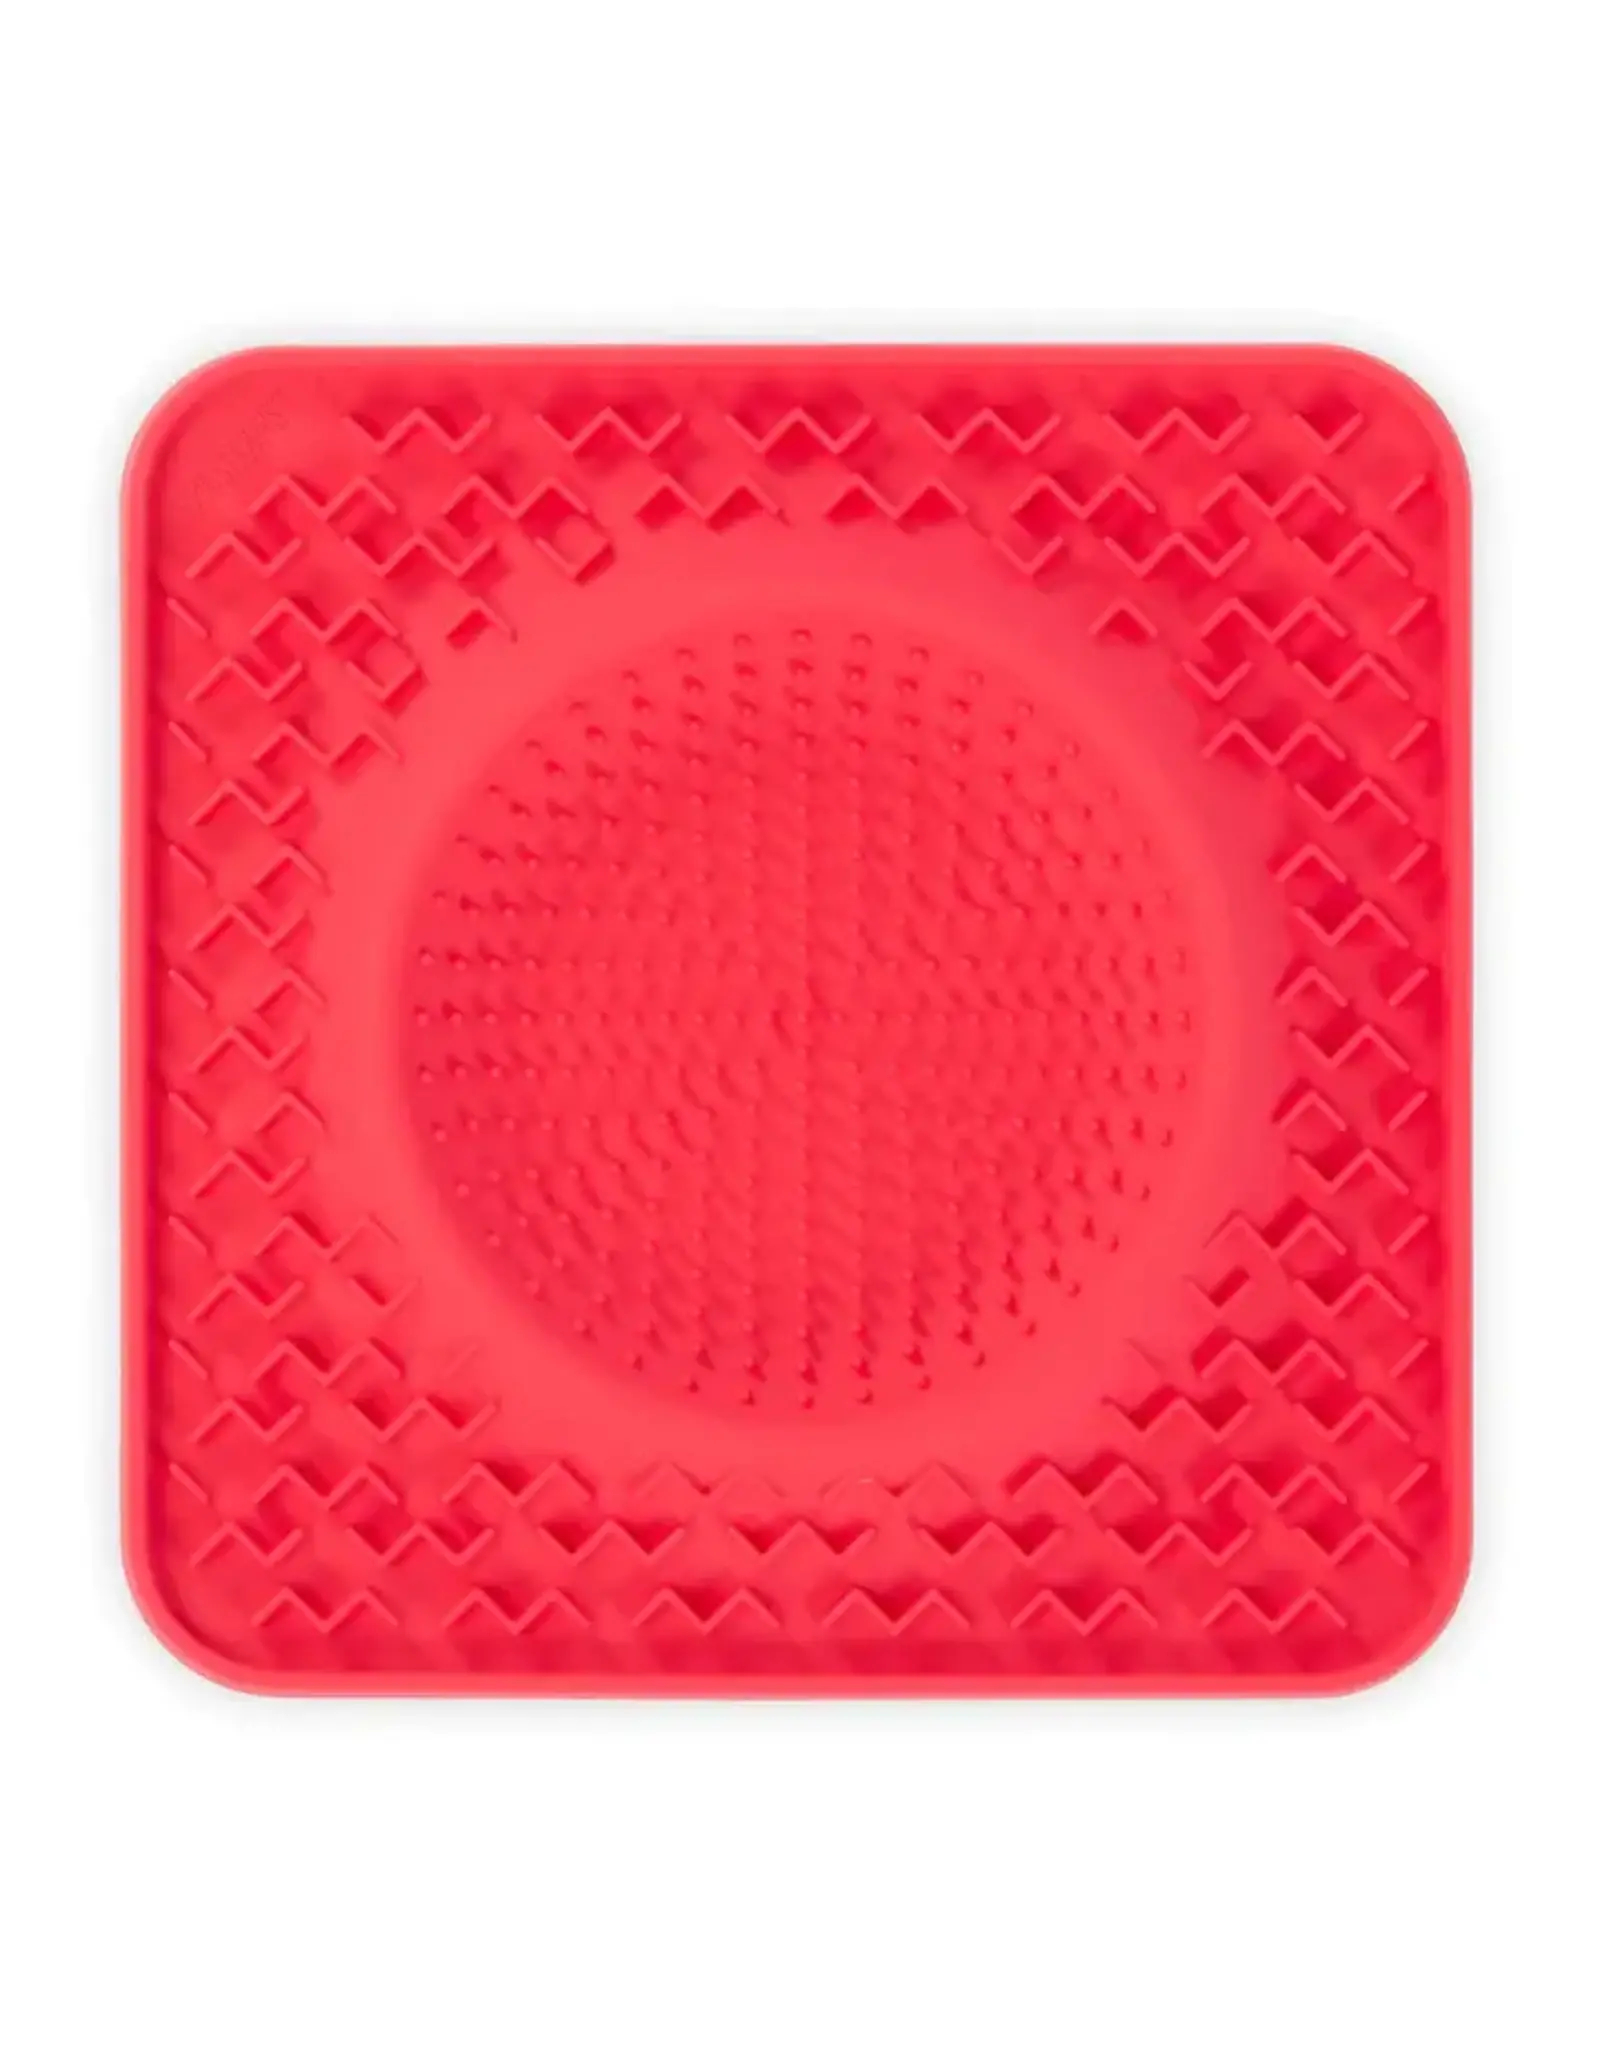 MESSY MUTTS MESSY MUTT INTERACTIVE FEEDER MAT RED